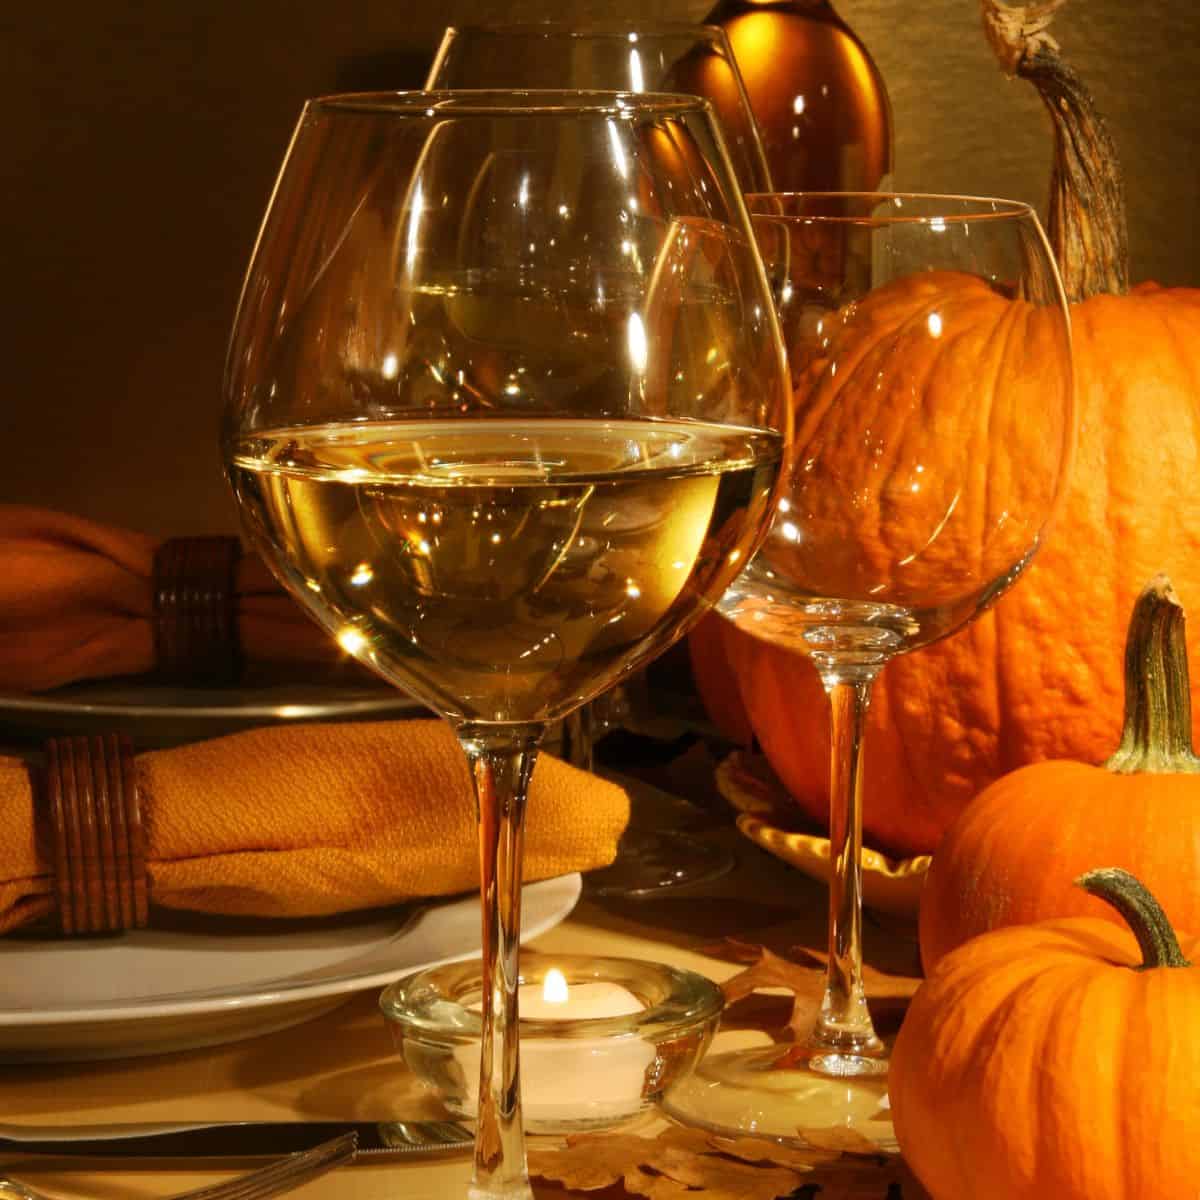 Glasses of white wine with pumpkins in the background.